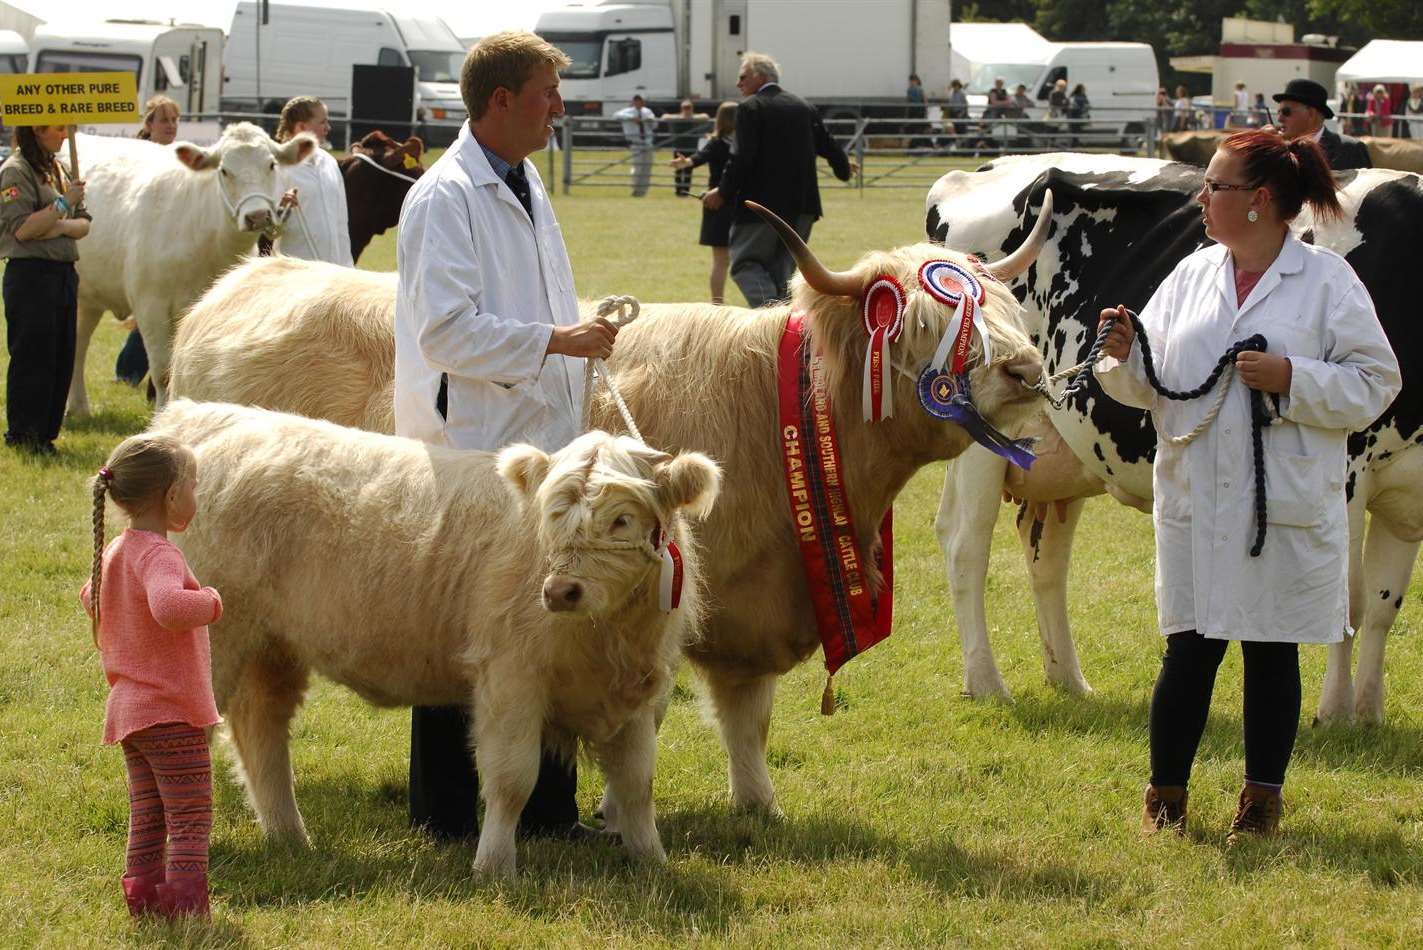 Livestock are one of the features of the Kent County Show